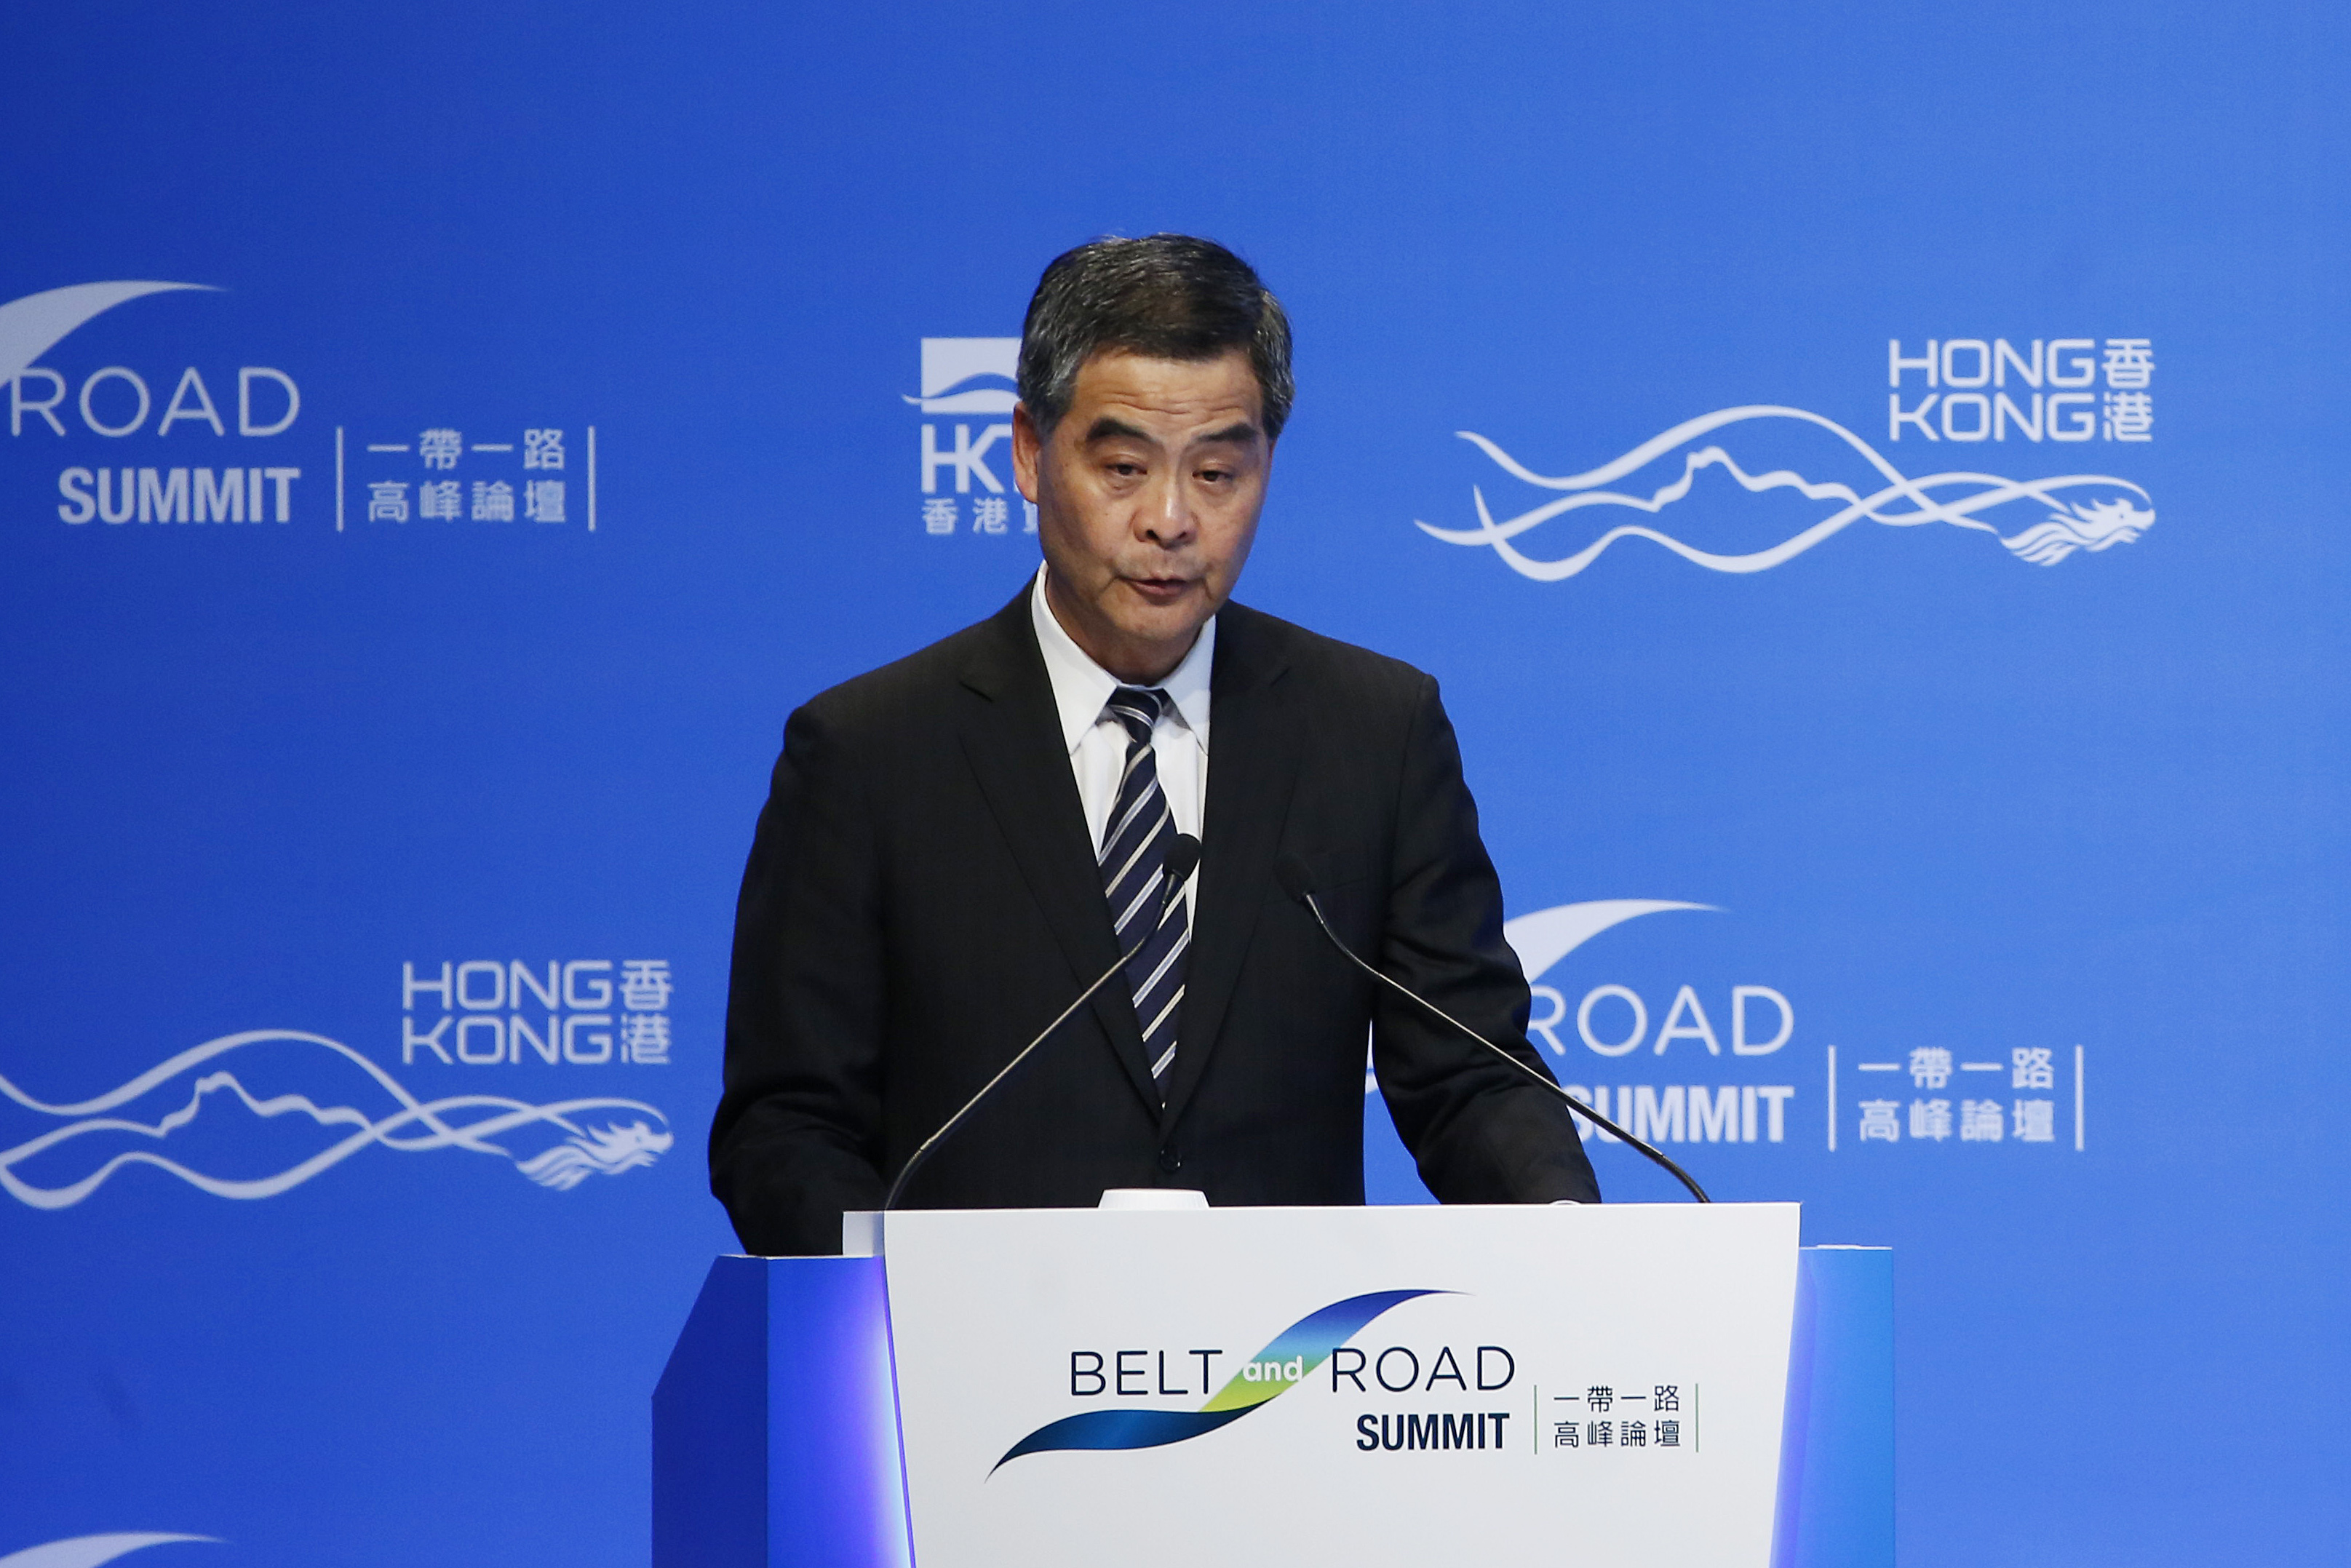 Key Speakers At The Belt and Road Summit